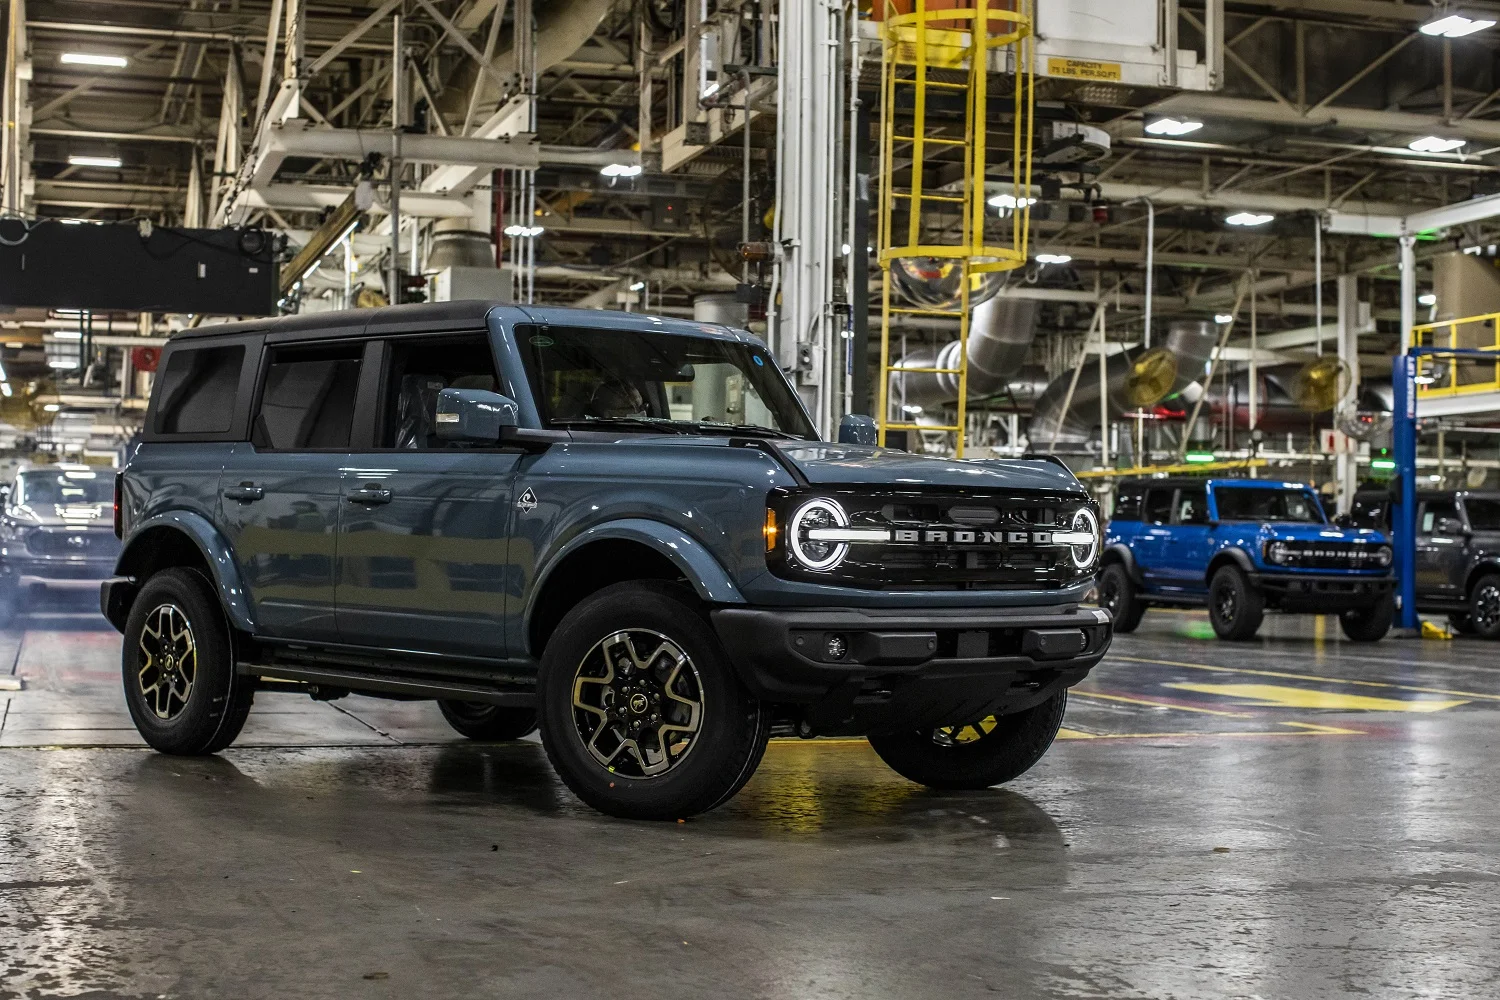 The New Ford Ranger Could Share One of the Bronco's Best Traits